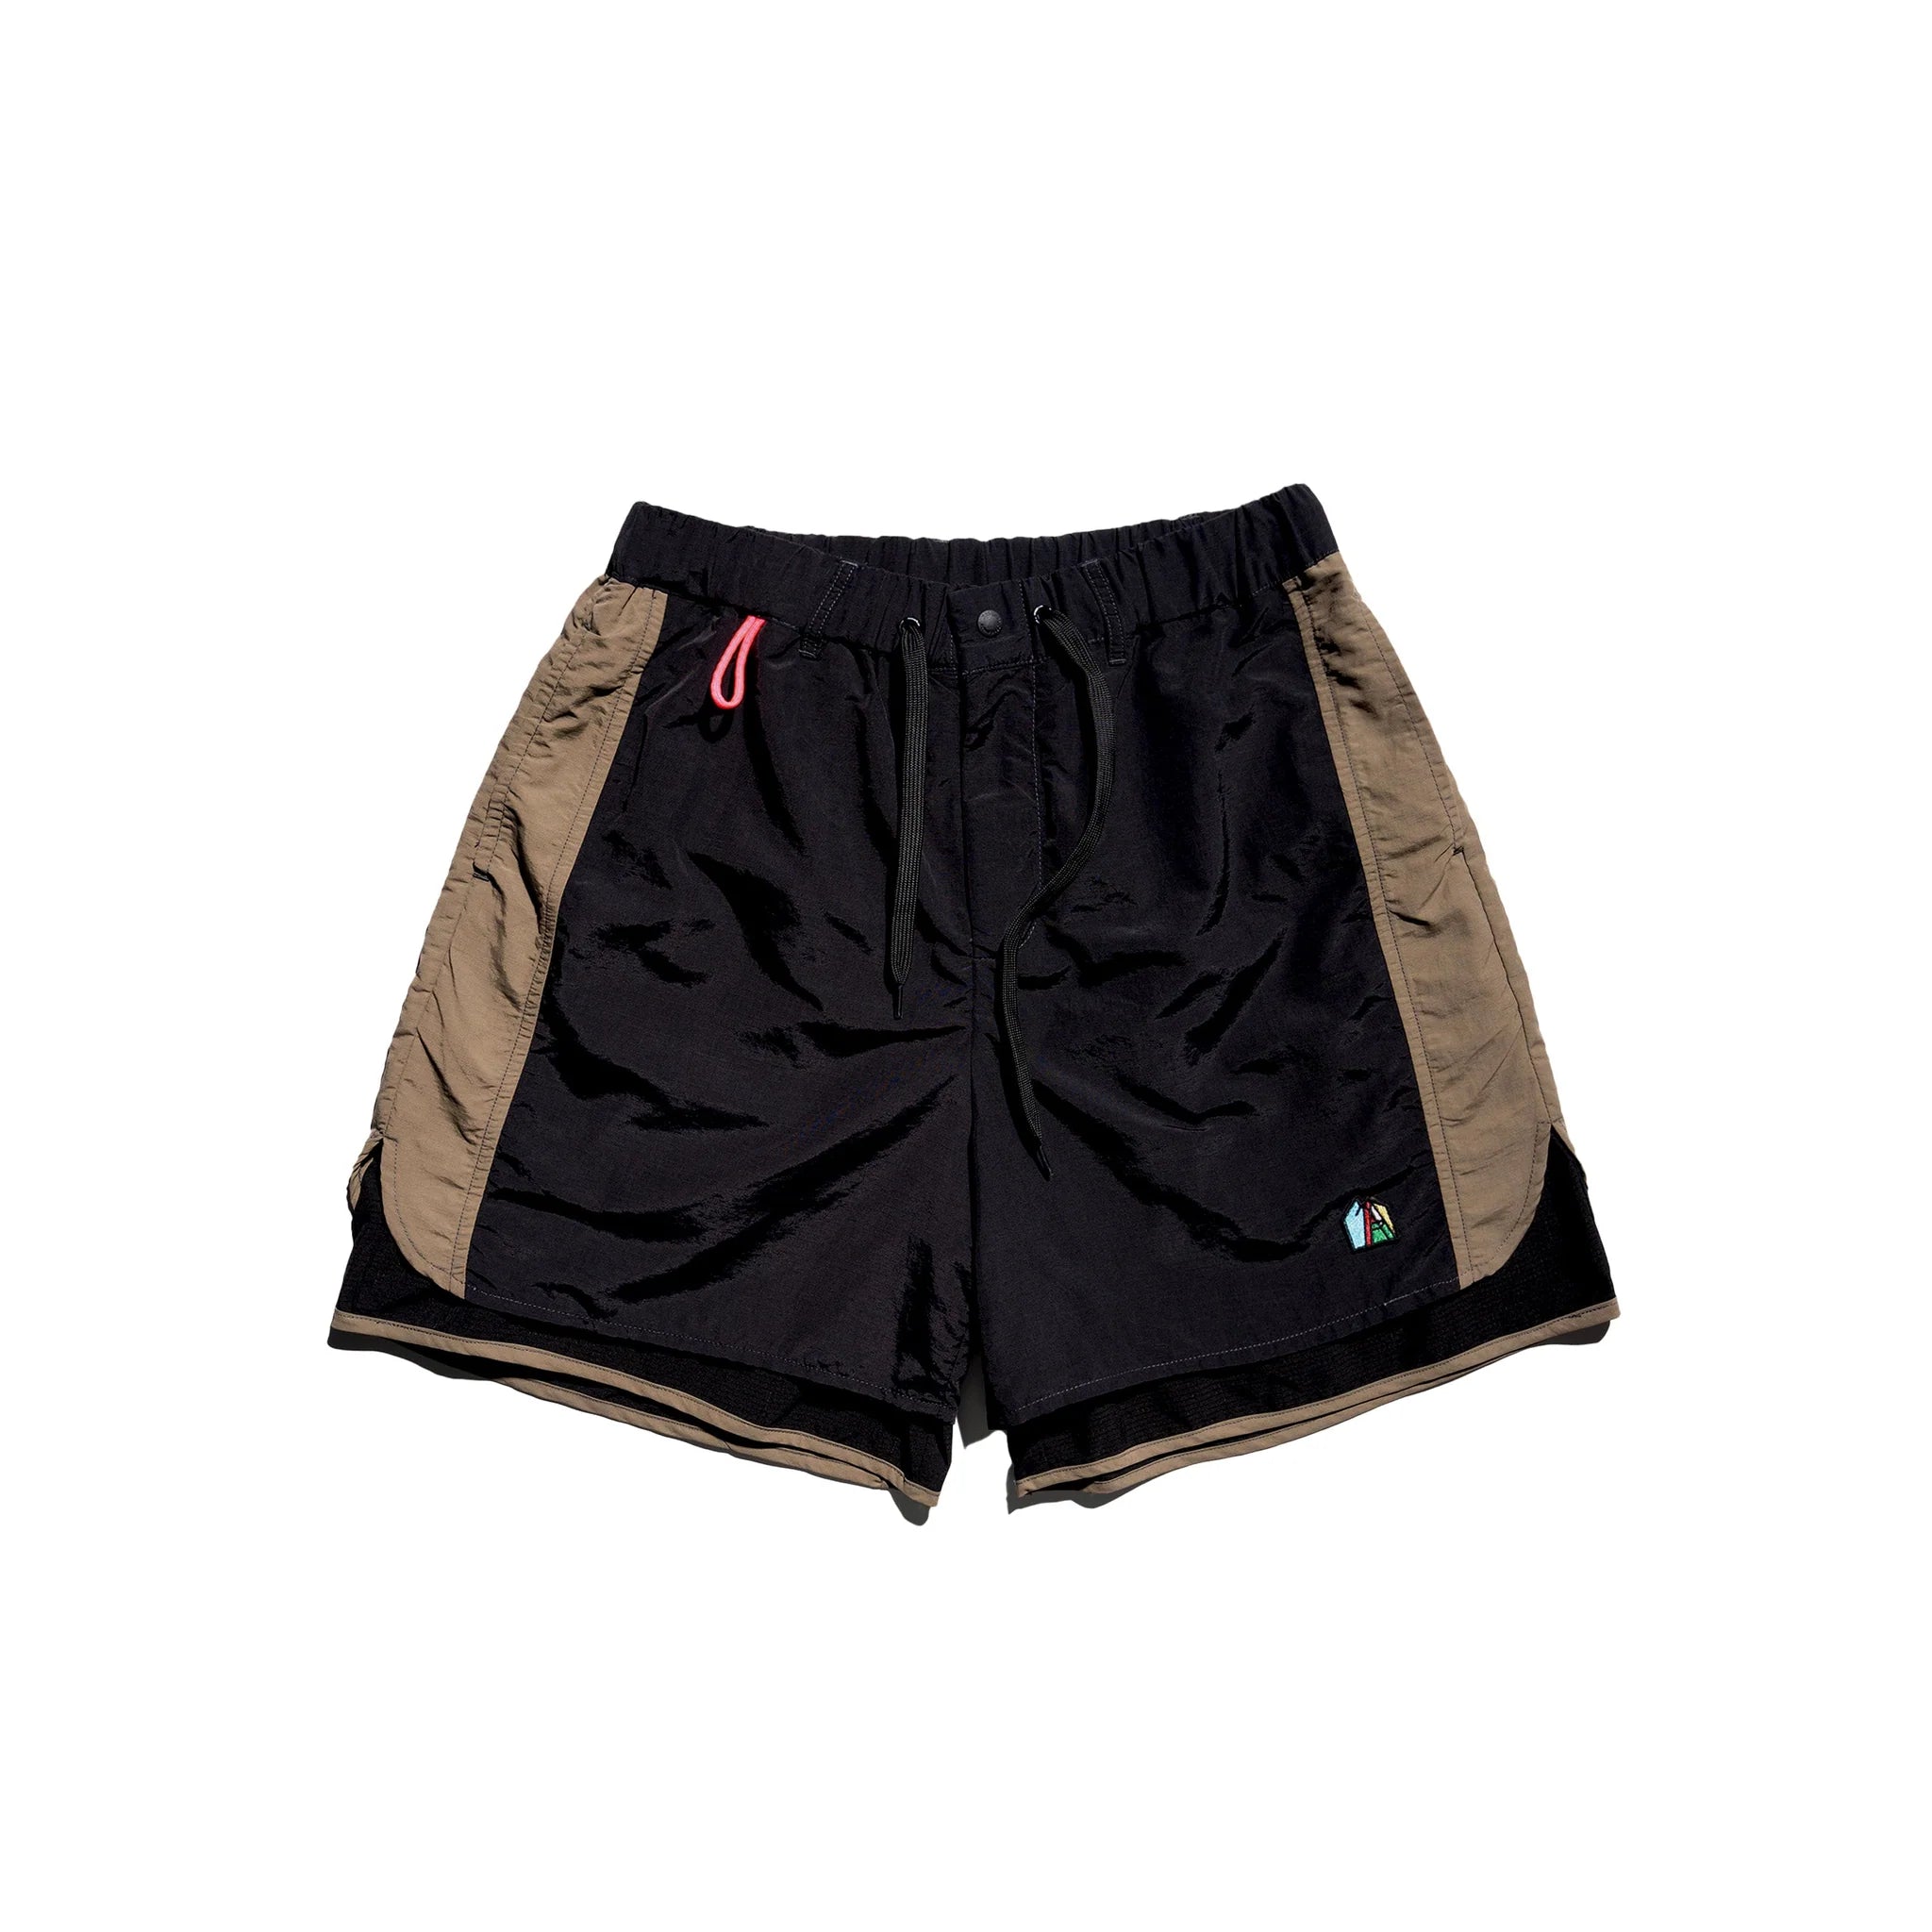 Against Lab | 5' Easy Layered Shorts Black